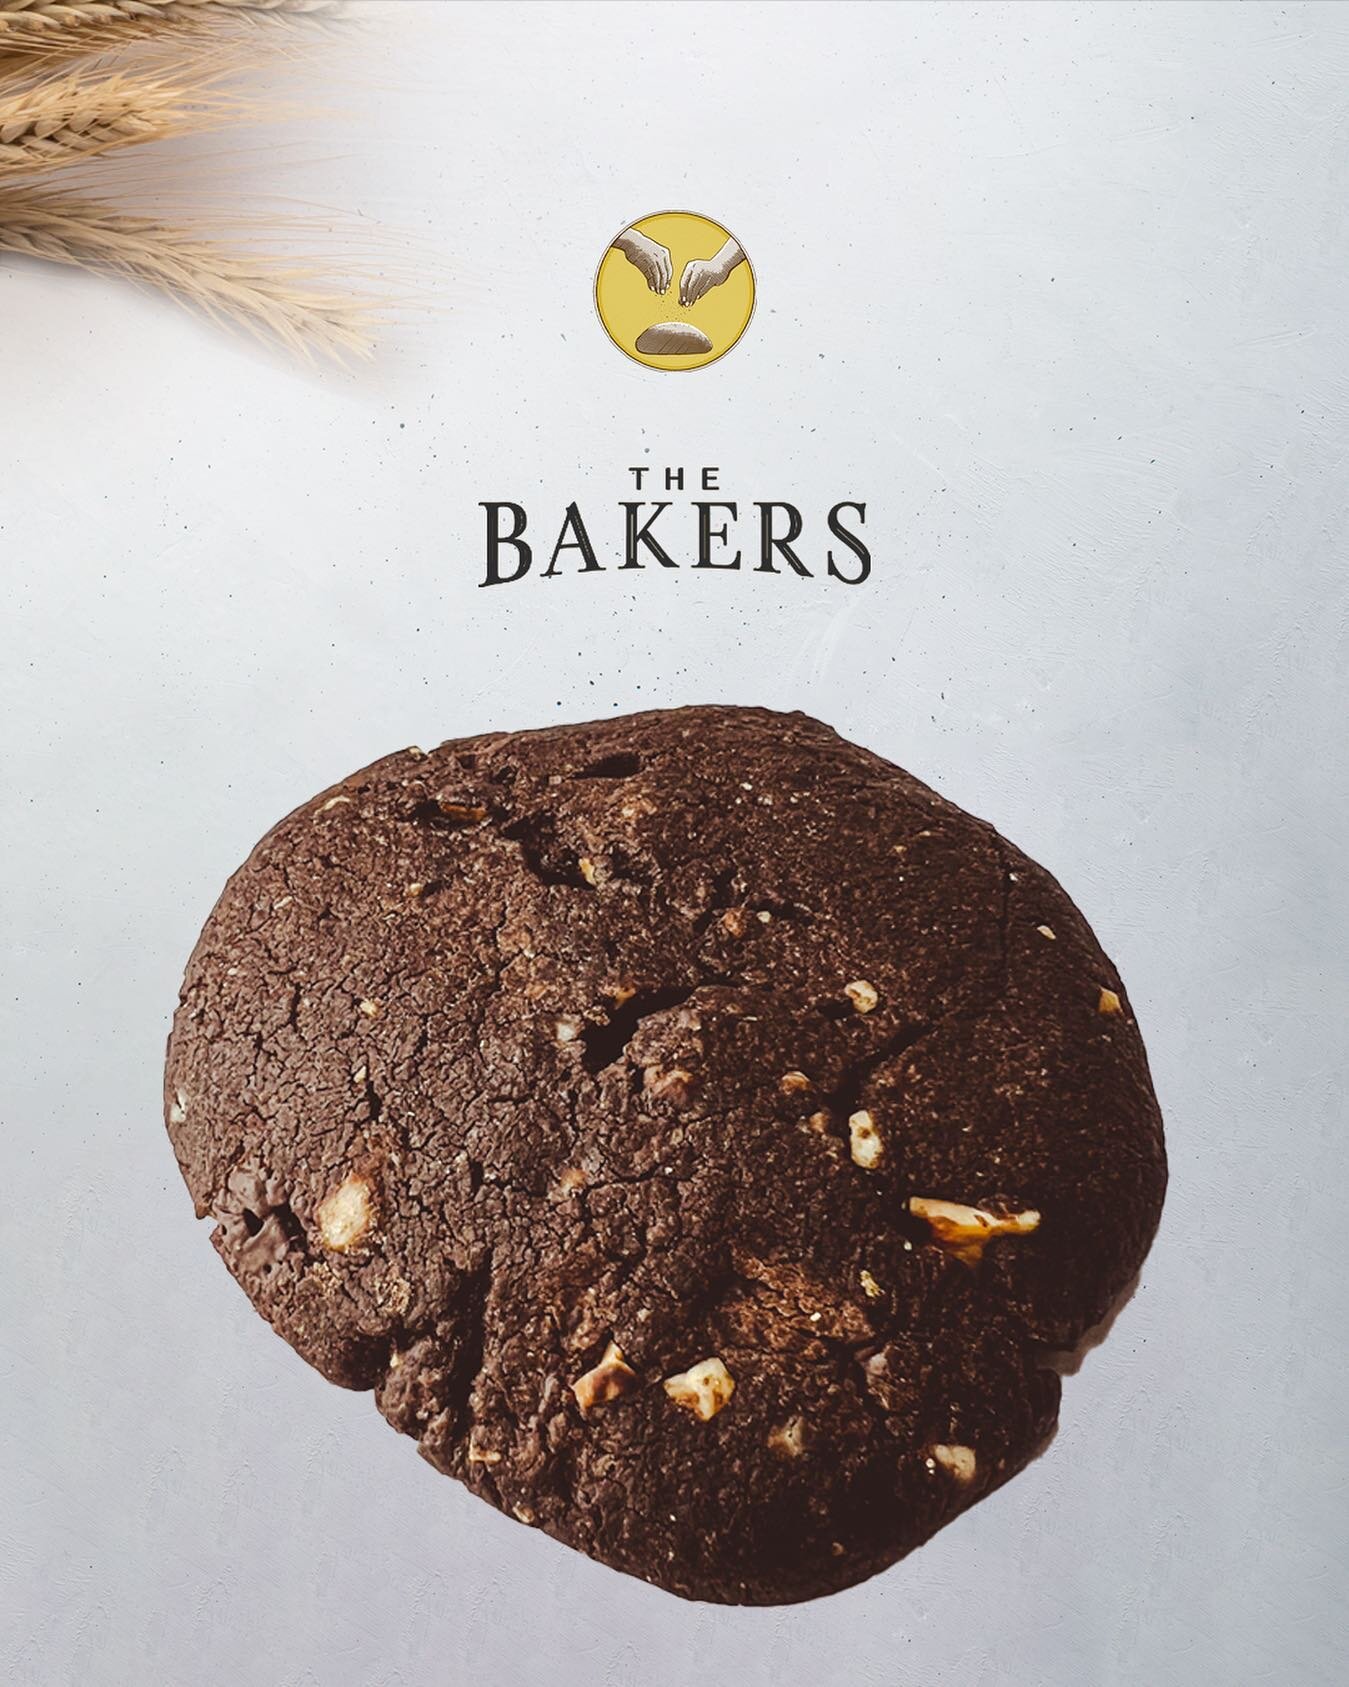 Craving Chocolate?? 

Order The Bakers Tripple Chocolate Cookie 🍪